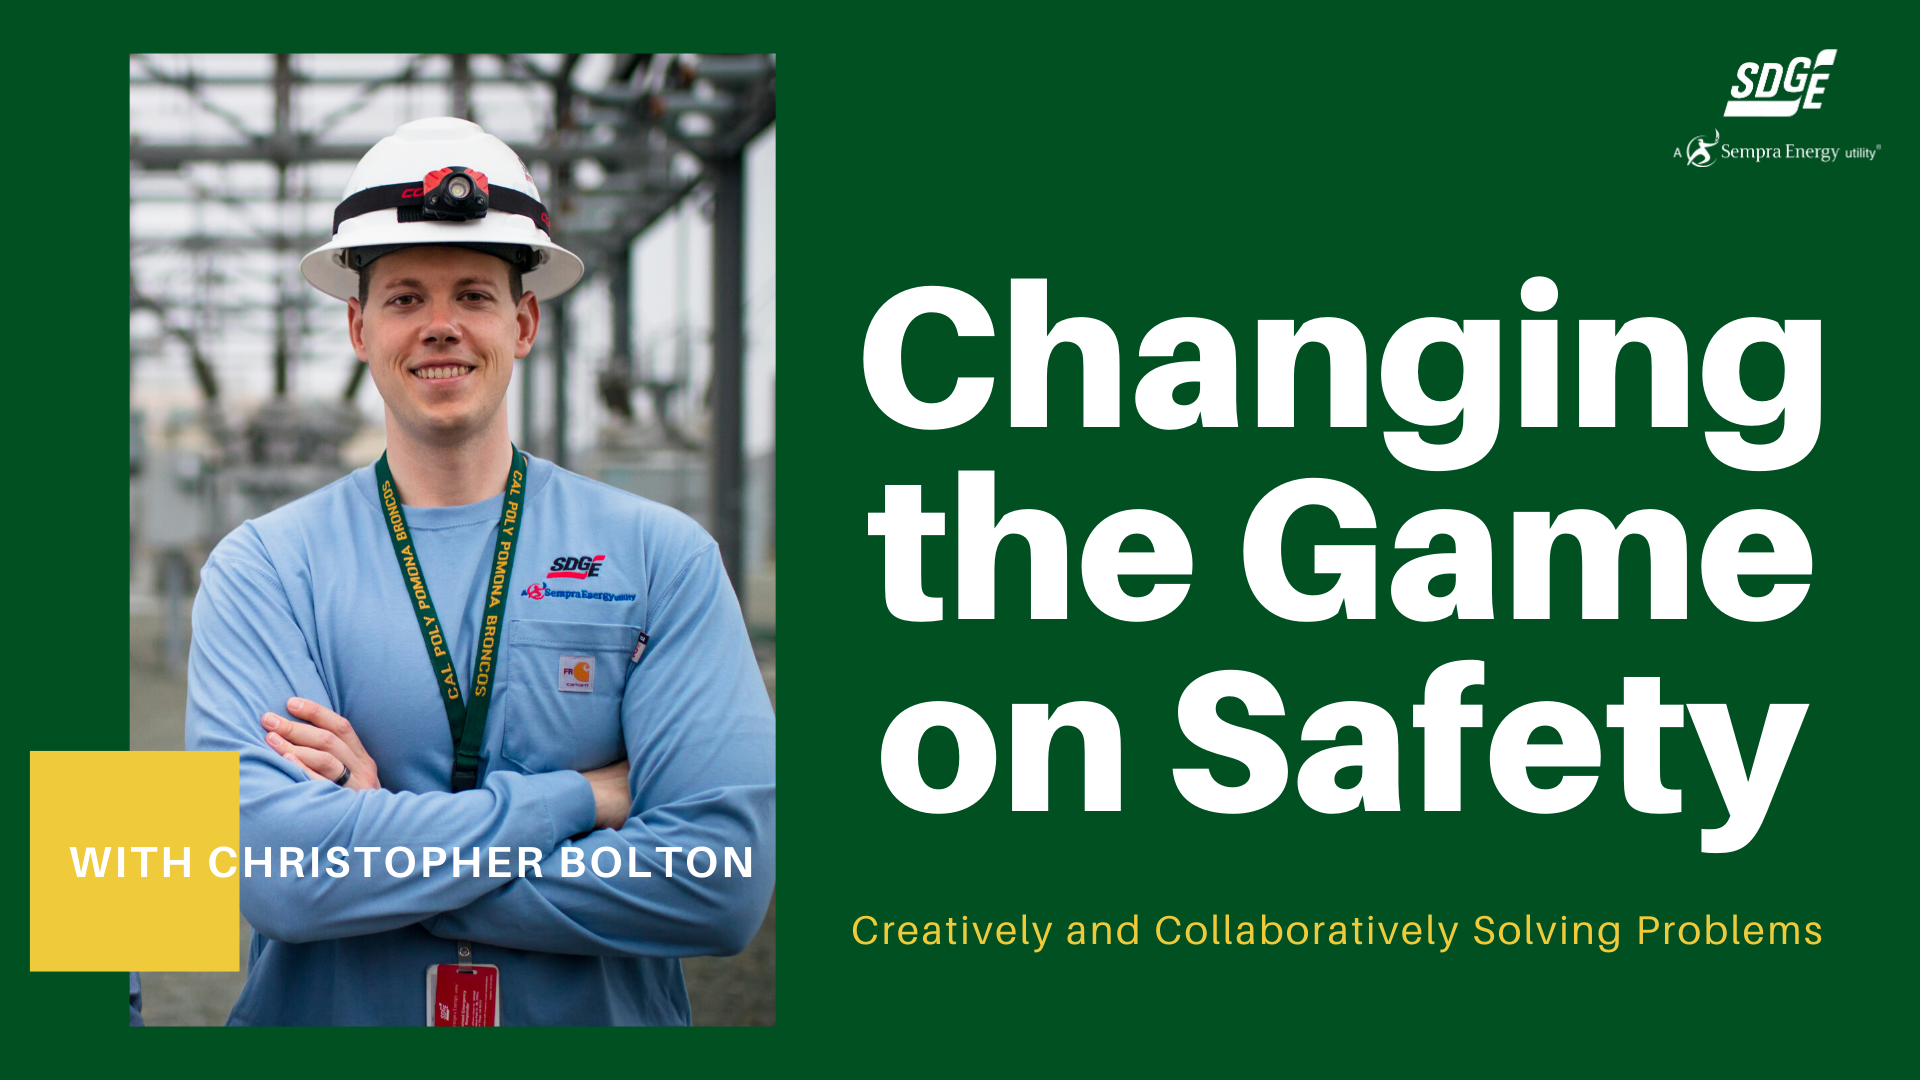 National Engineers Week: How System Protection Engineering Manager Christopher Bolton and His Team Work to Change the Game on Grid Safety